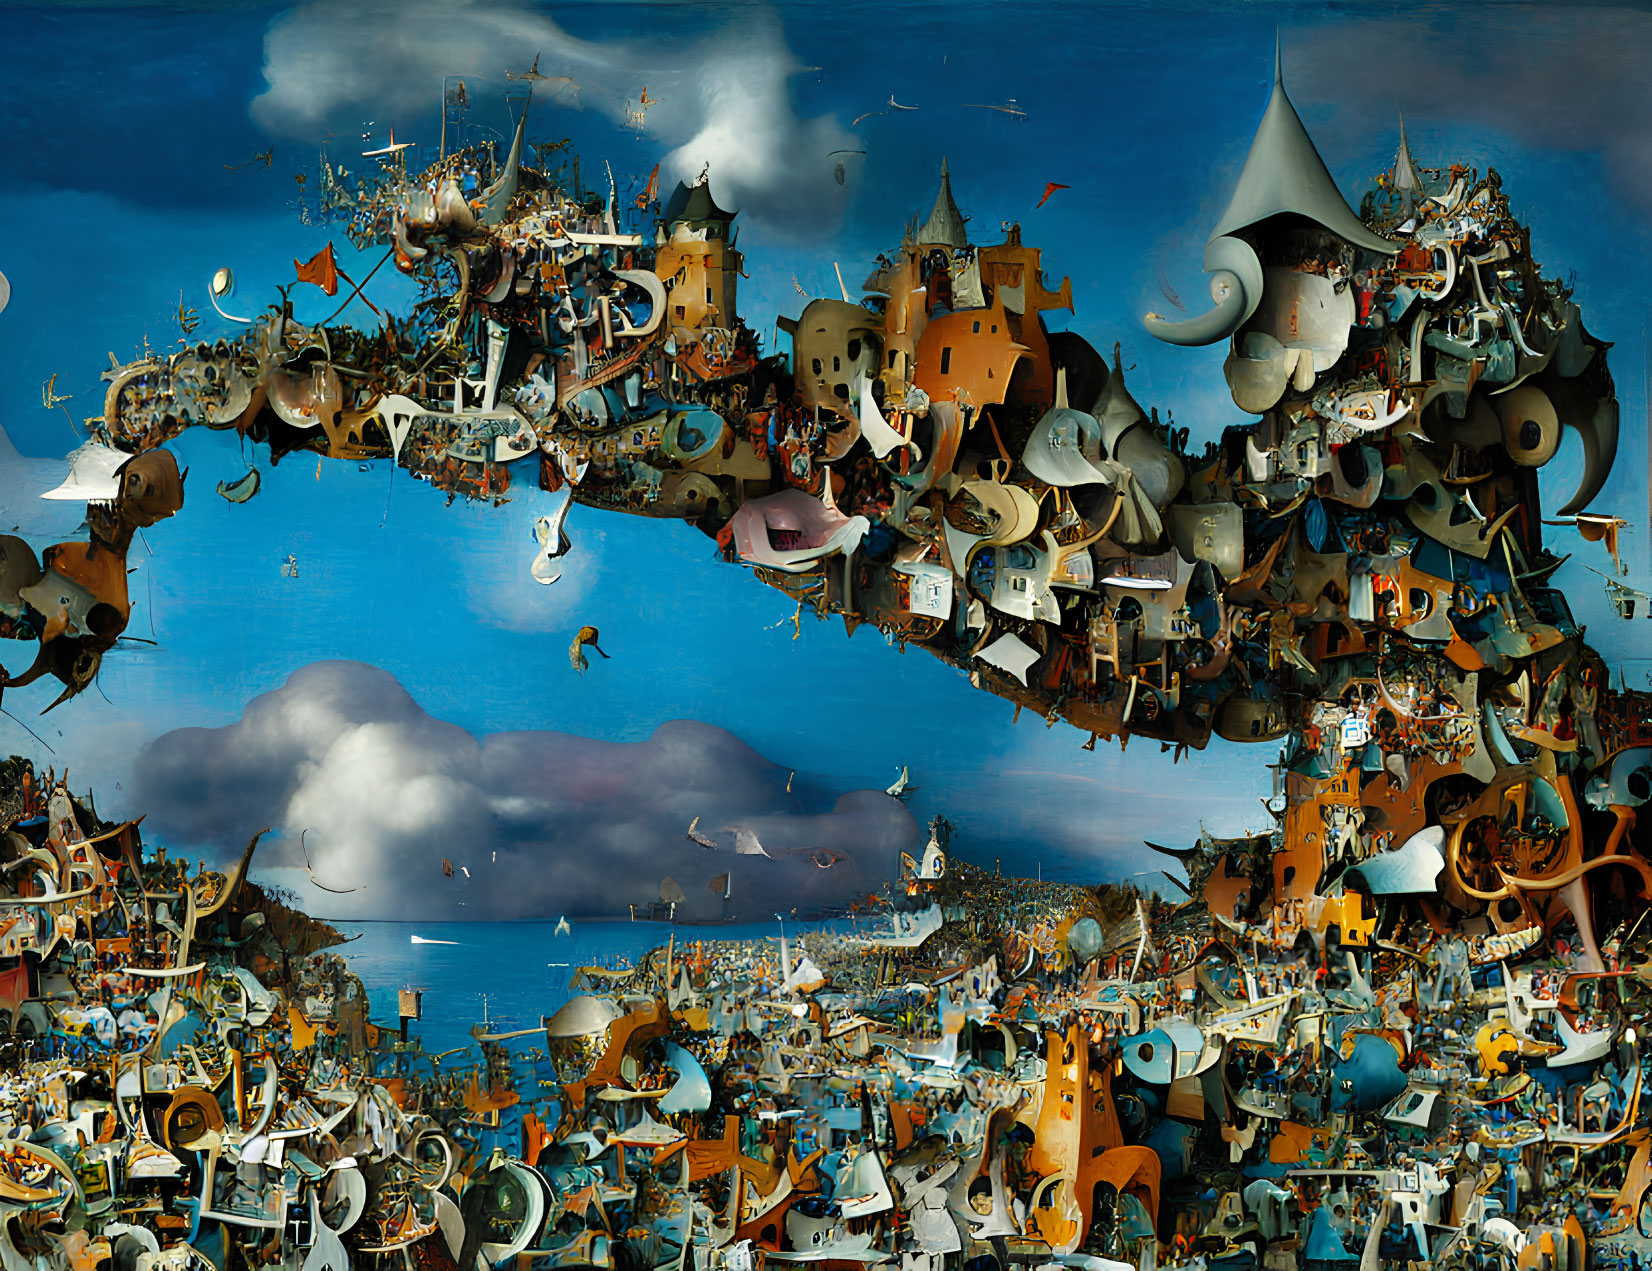 Whimsical surreal panorama with floating structures and animals